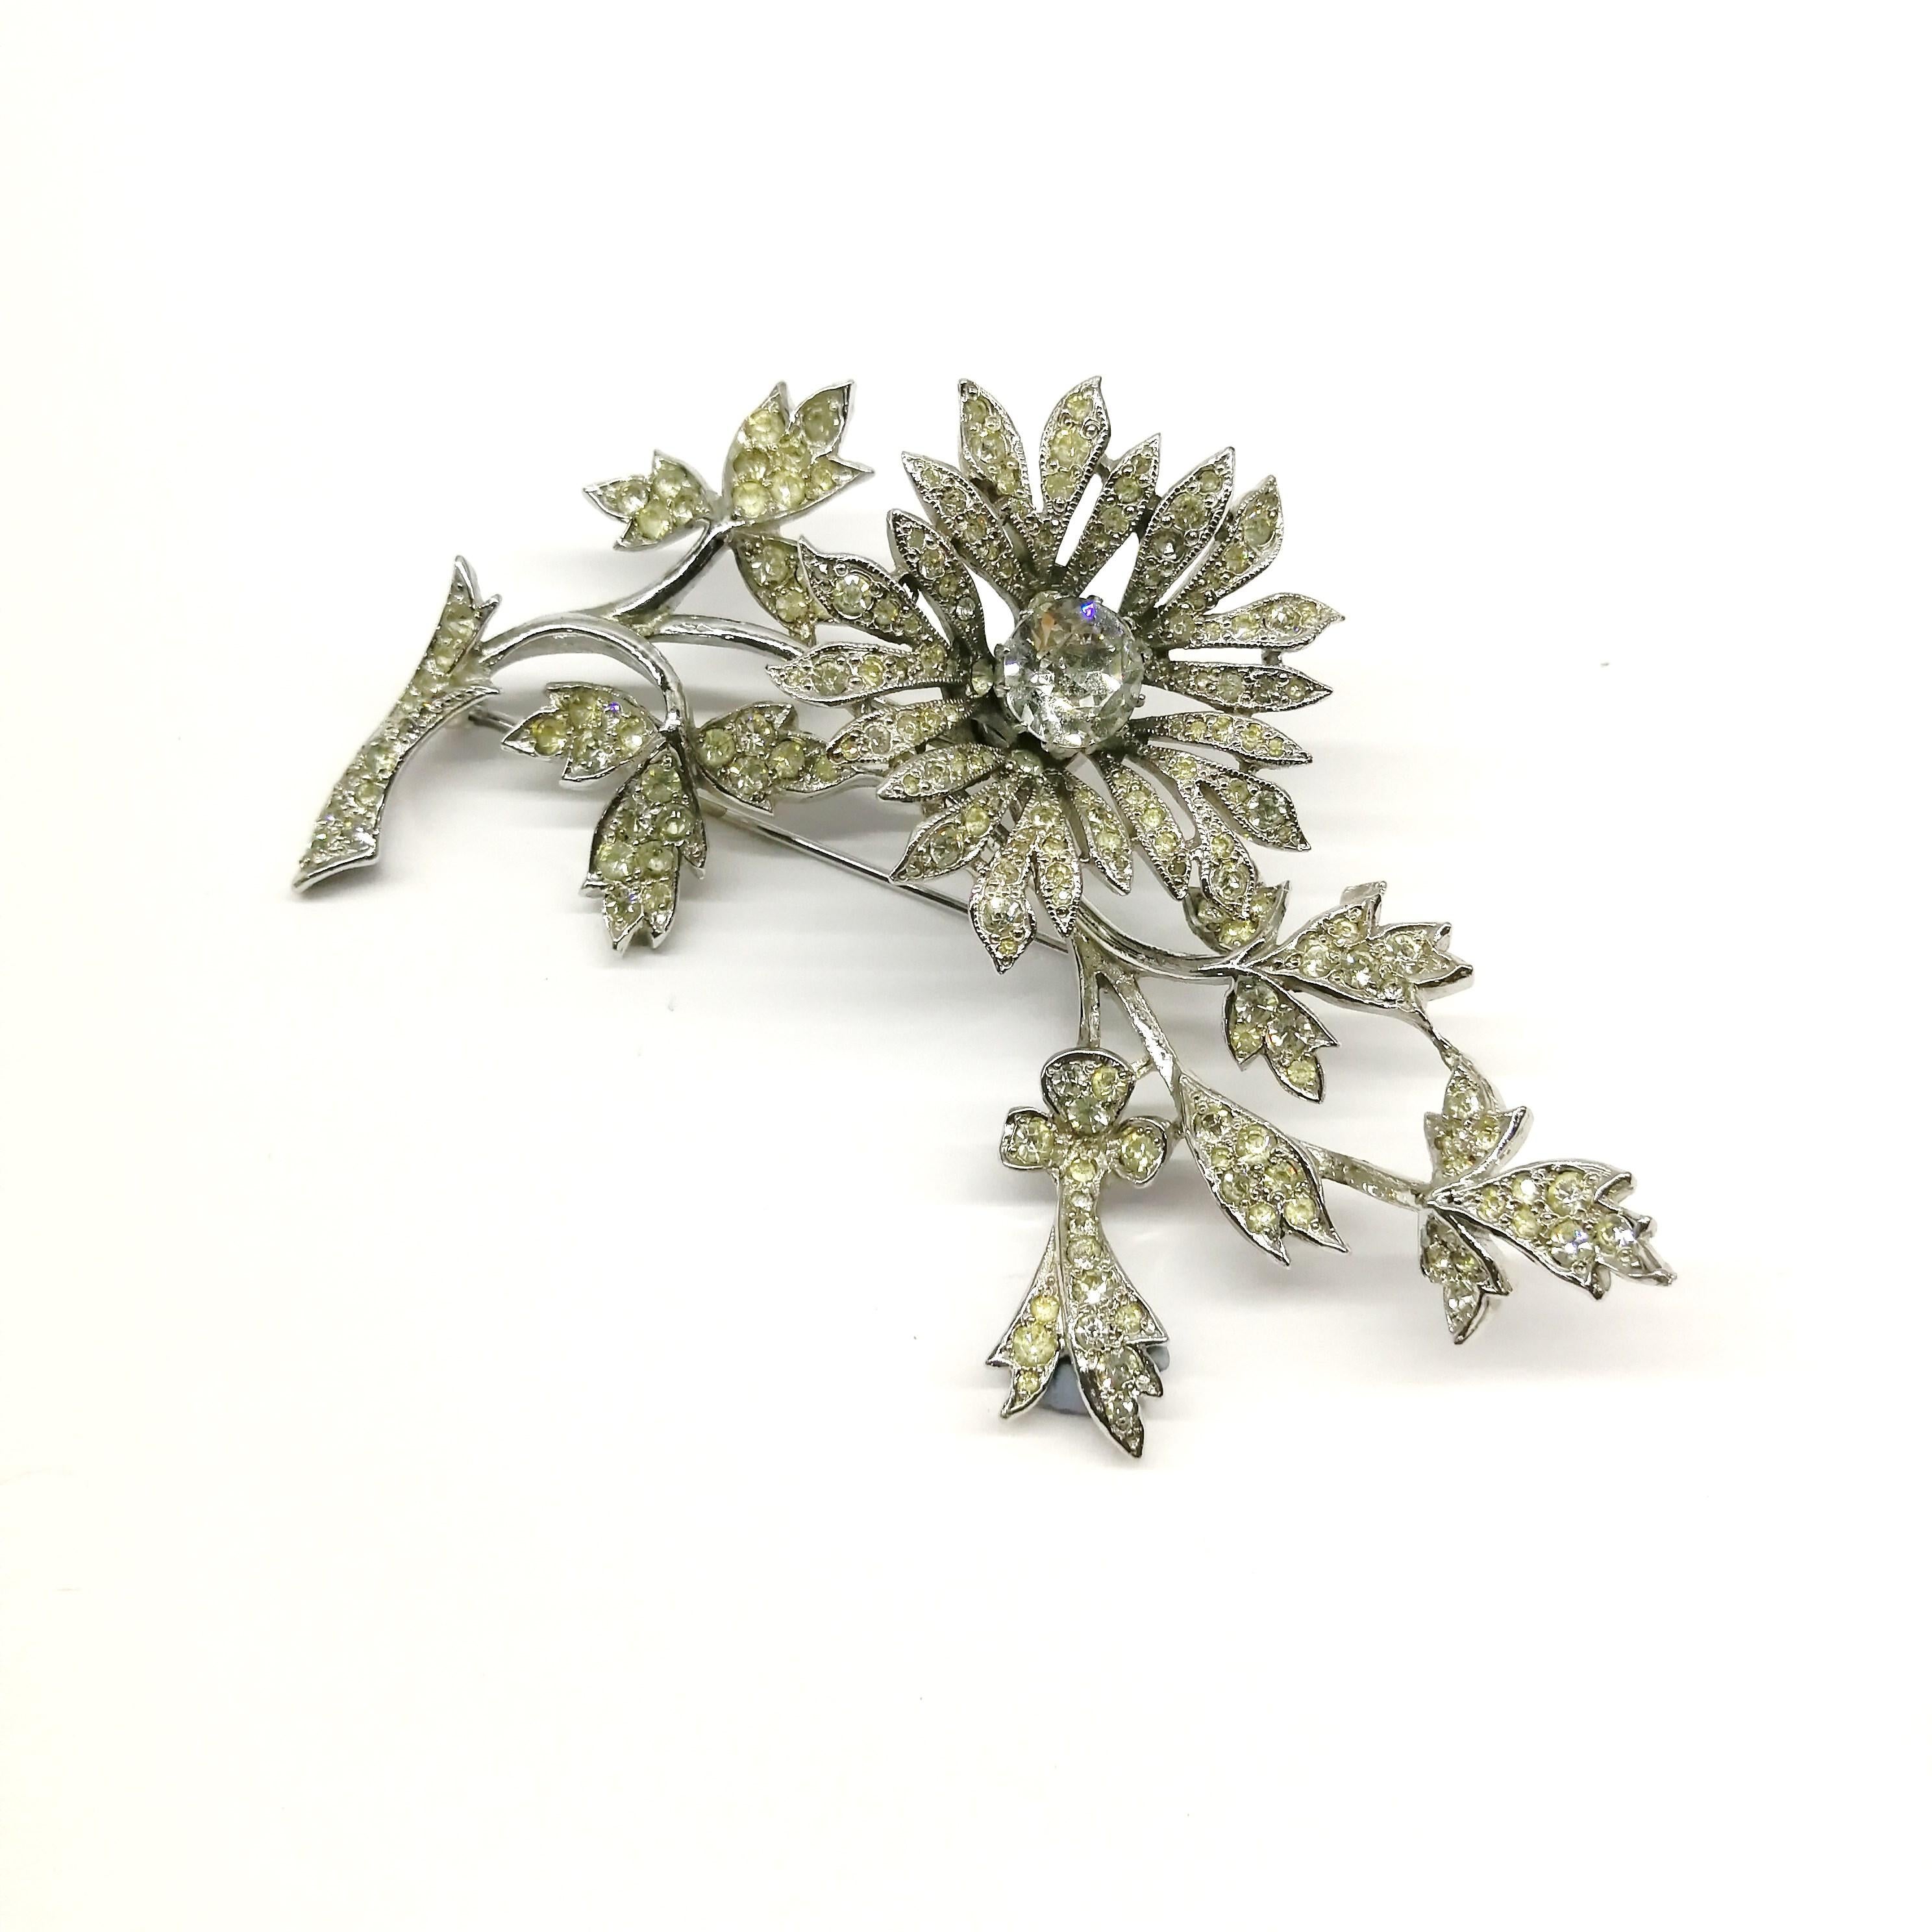 A wonderful and very rare base metal and clear paste 'en tremblant' brooch, made by Mitchel Maer for Christian Dior. Designed at the height of Dior's powers and highly representative of his vision during the early 1950s, when he was looking back to